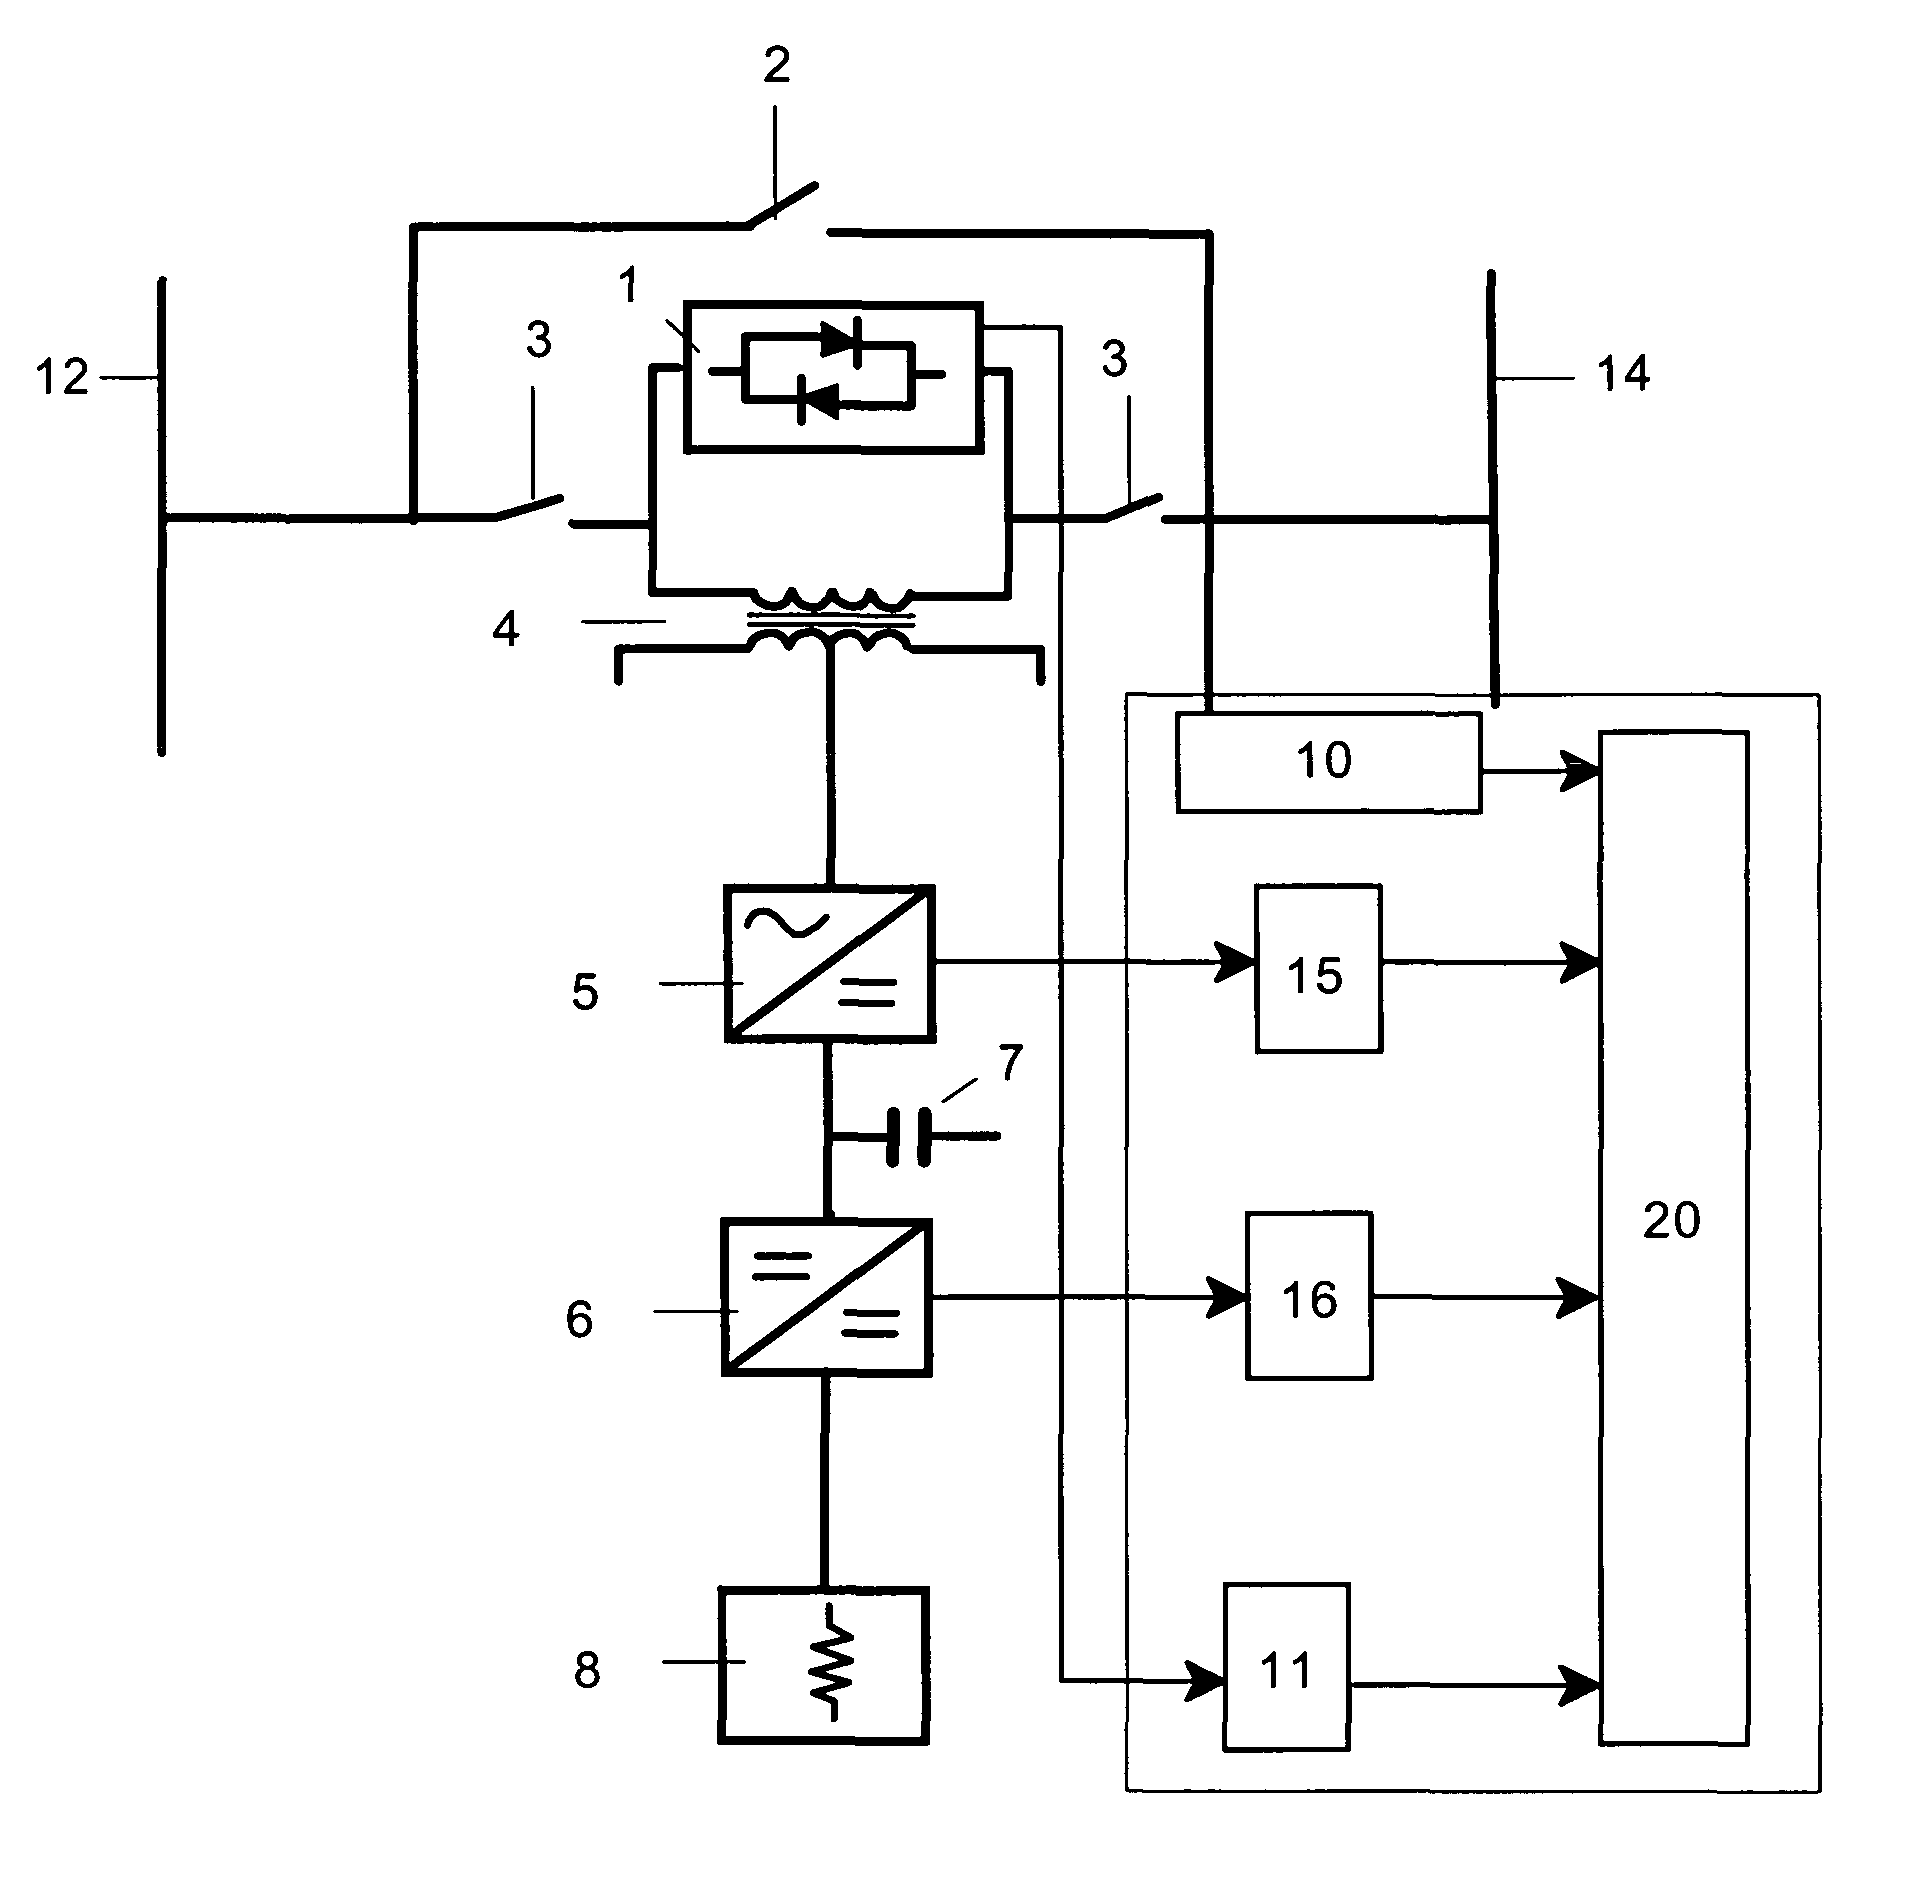 Method and device for preventing the disconnection of an electric power generating plant from the electrical grid